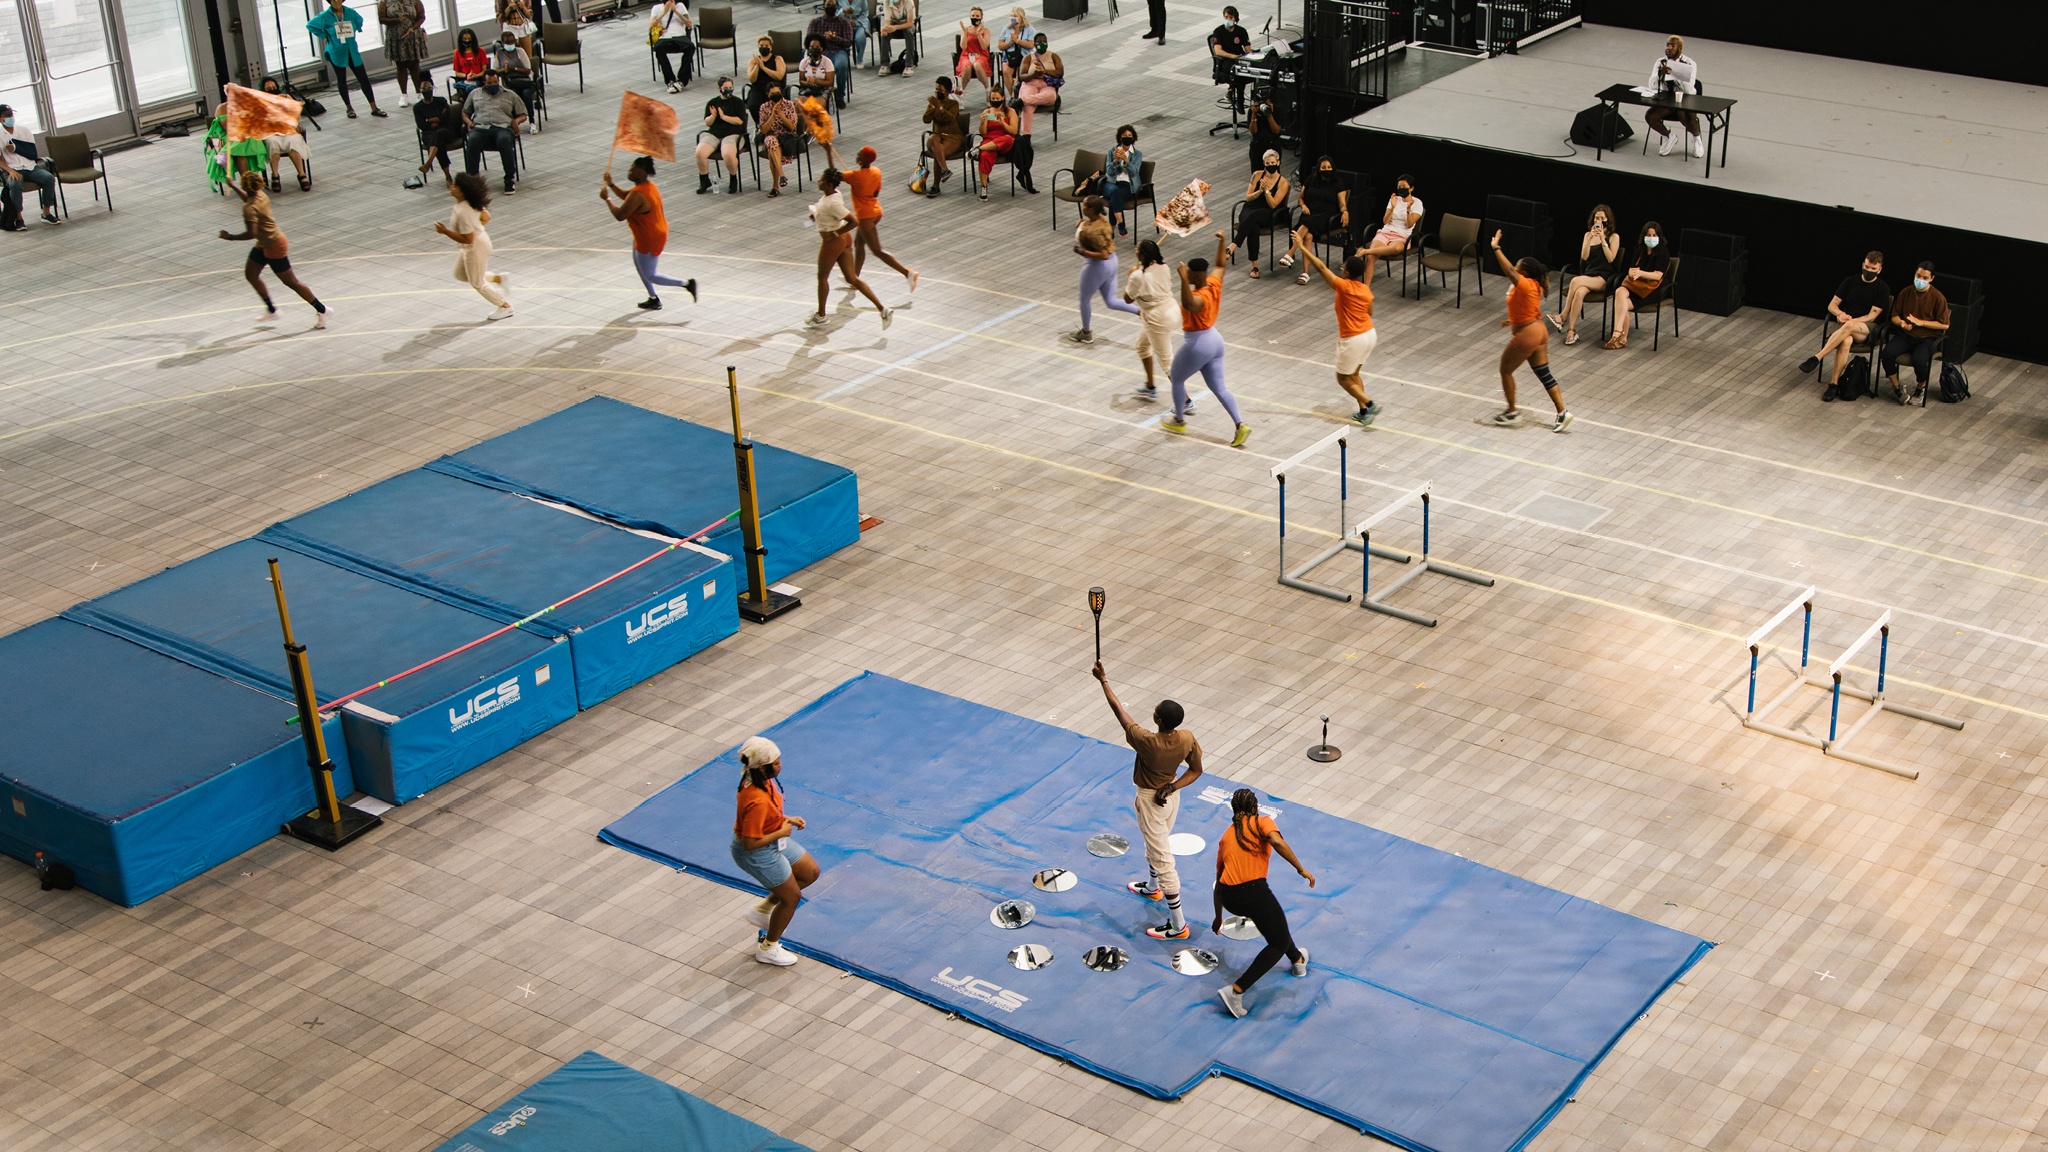 Blue athletic mats laid out in an open performance space. Athletes are running around a track that encircles the mats. 